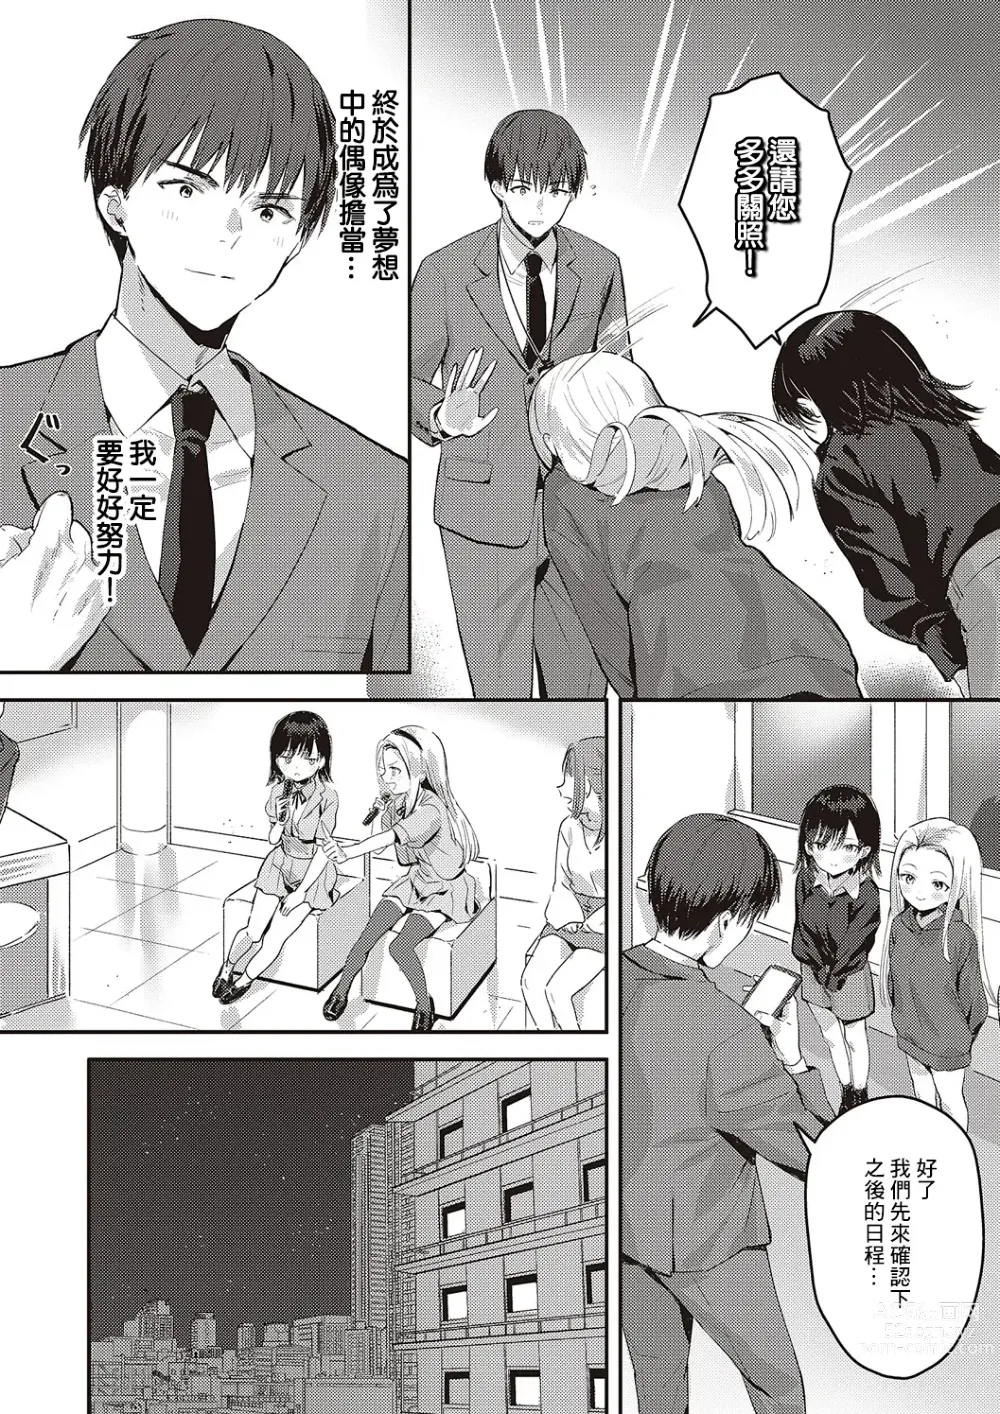 Page 3 of manga BACK STAGE